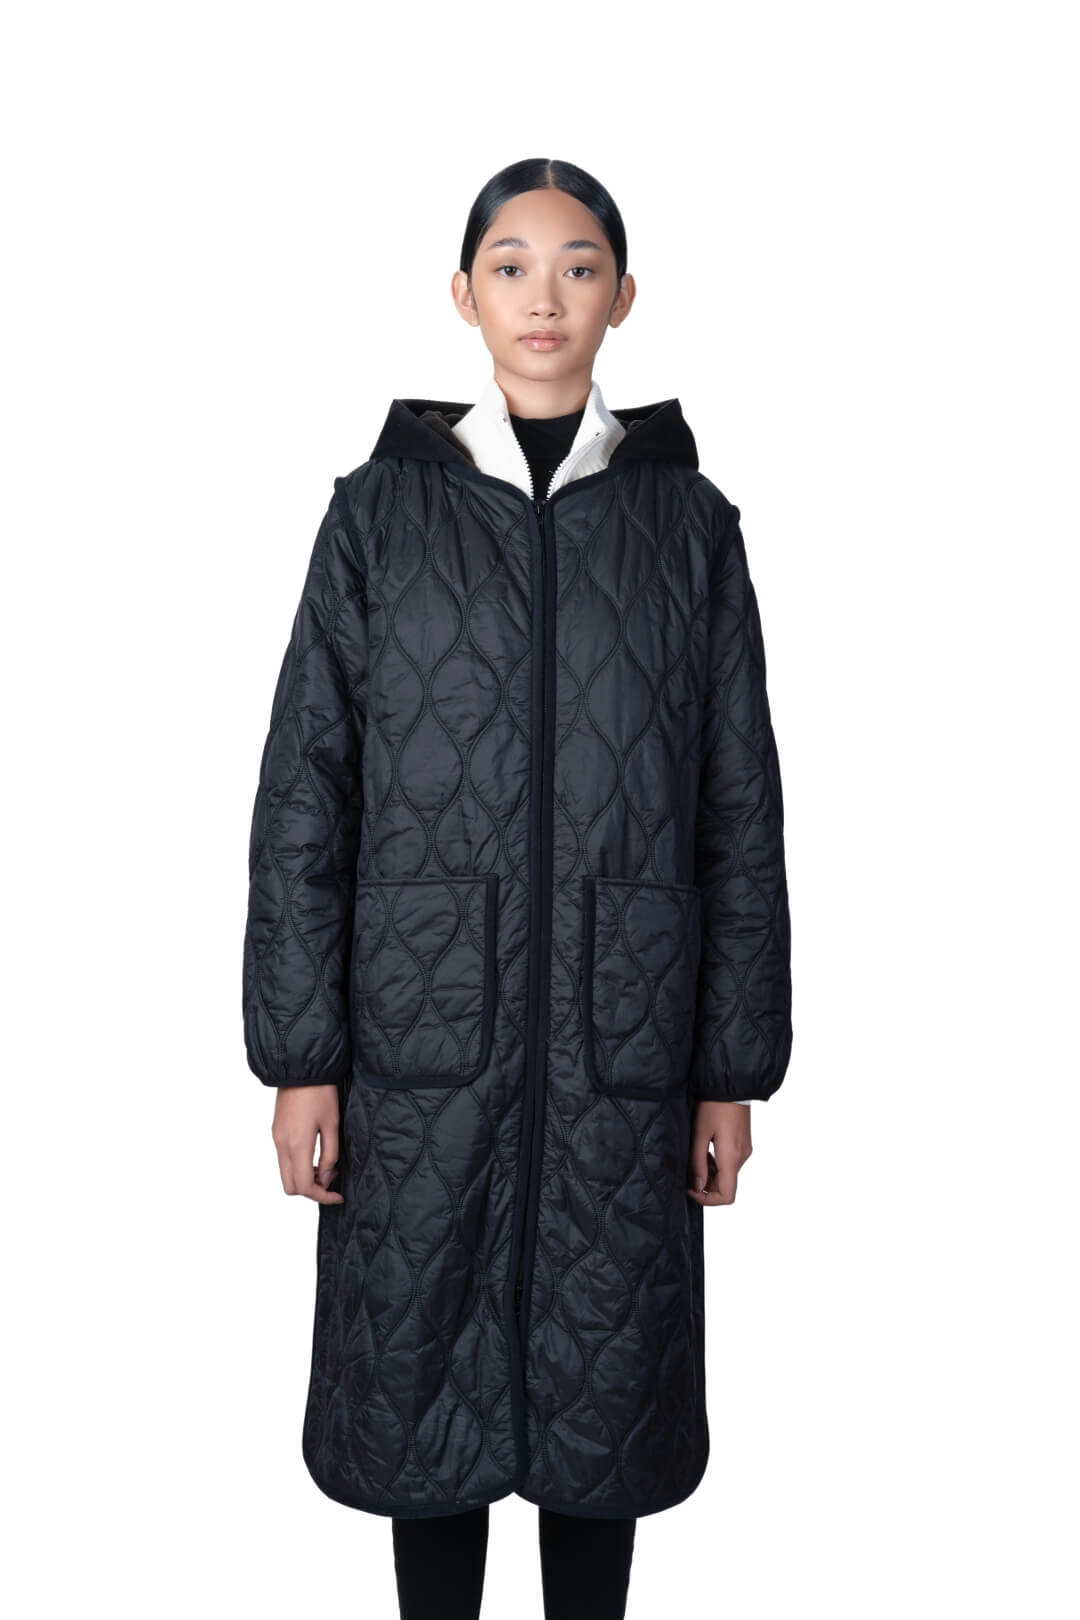 Lunar New Year Ladies Quilted Long Jacket in knee length, sustainable and environmentally friendly Primaloft Gold Insulation Active+, with removable fleece hood, two-way front zipper, two waist patch pockets, and diamond quilted body, in Black